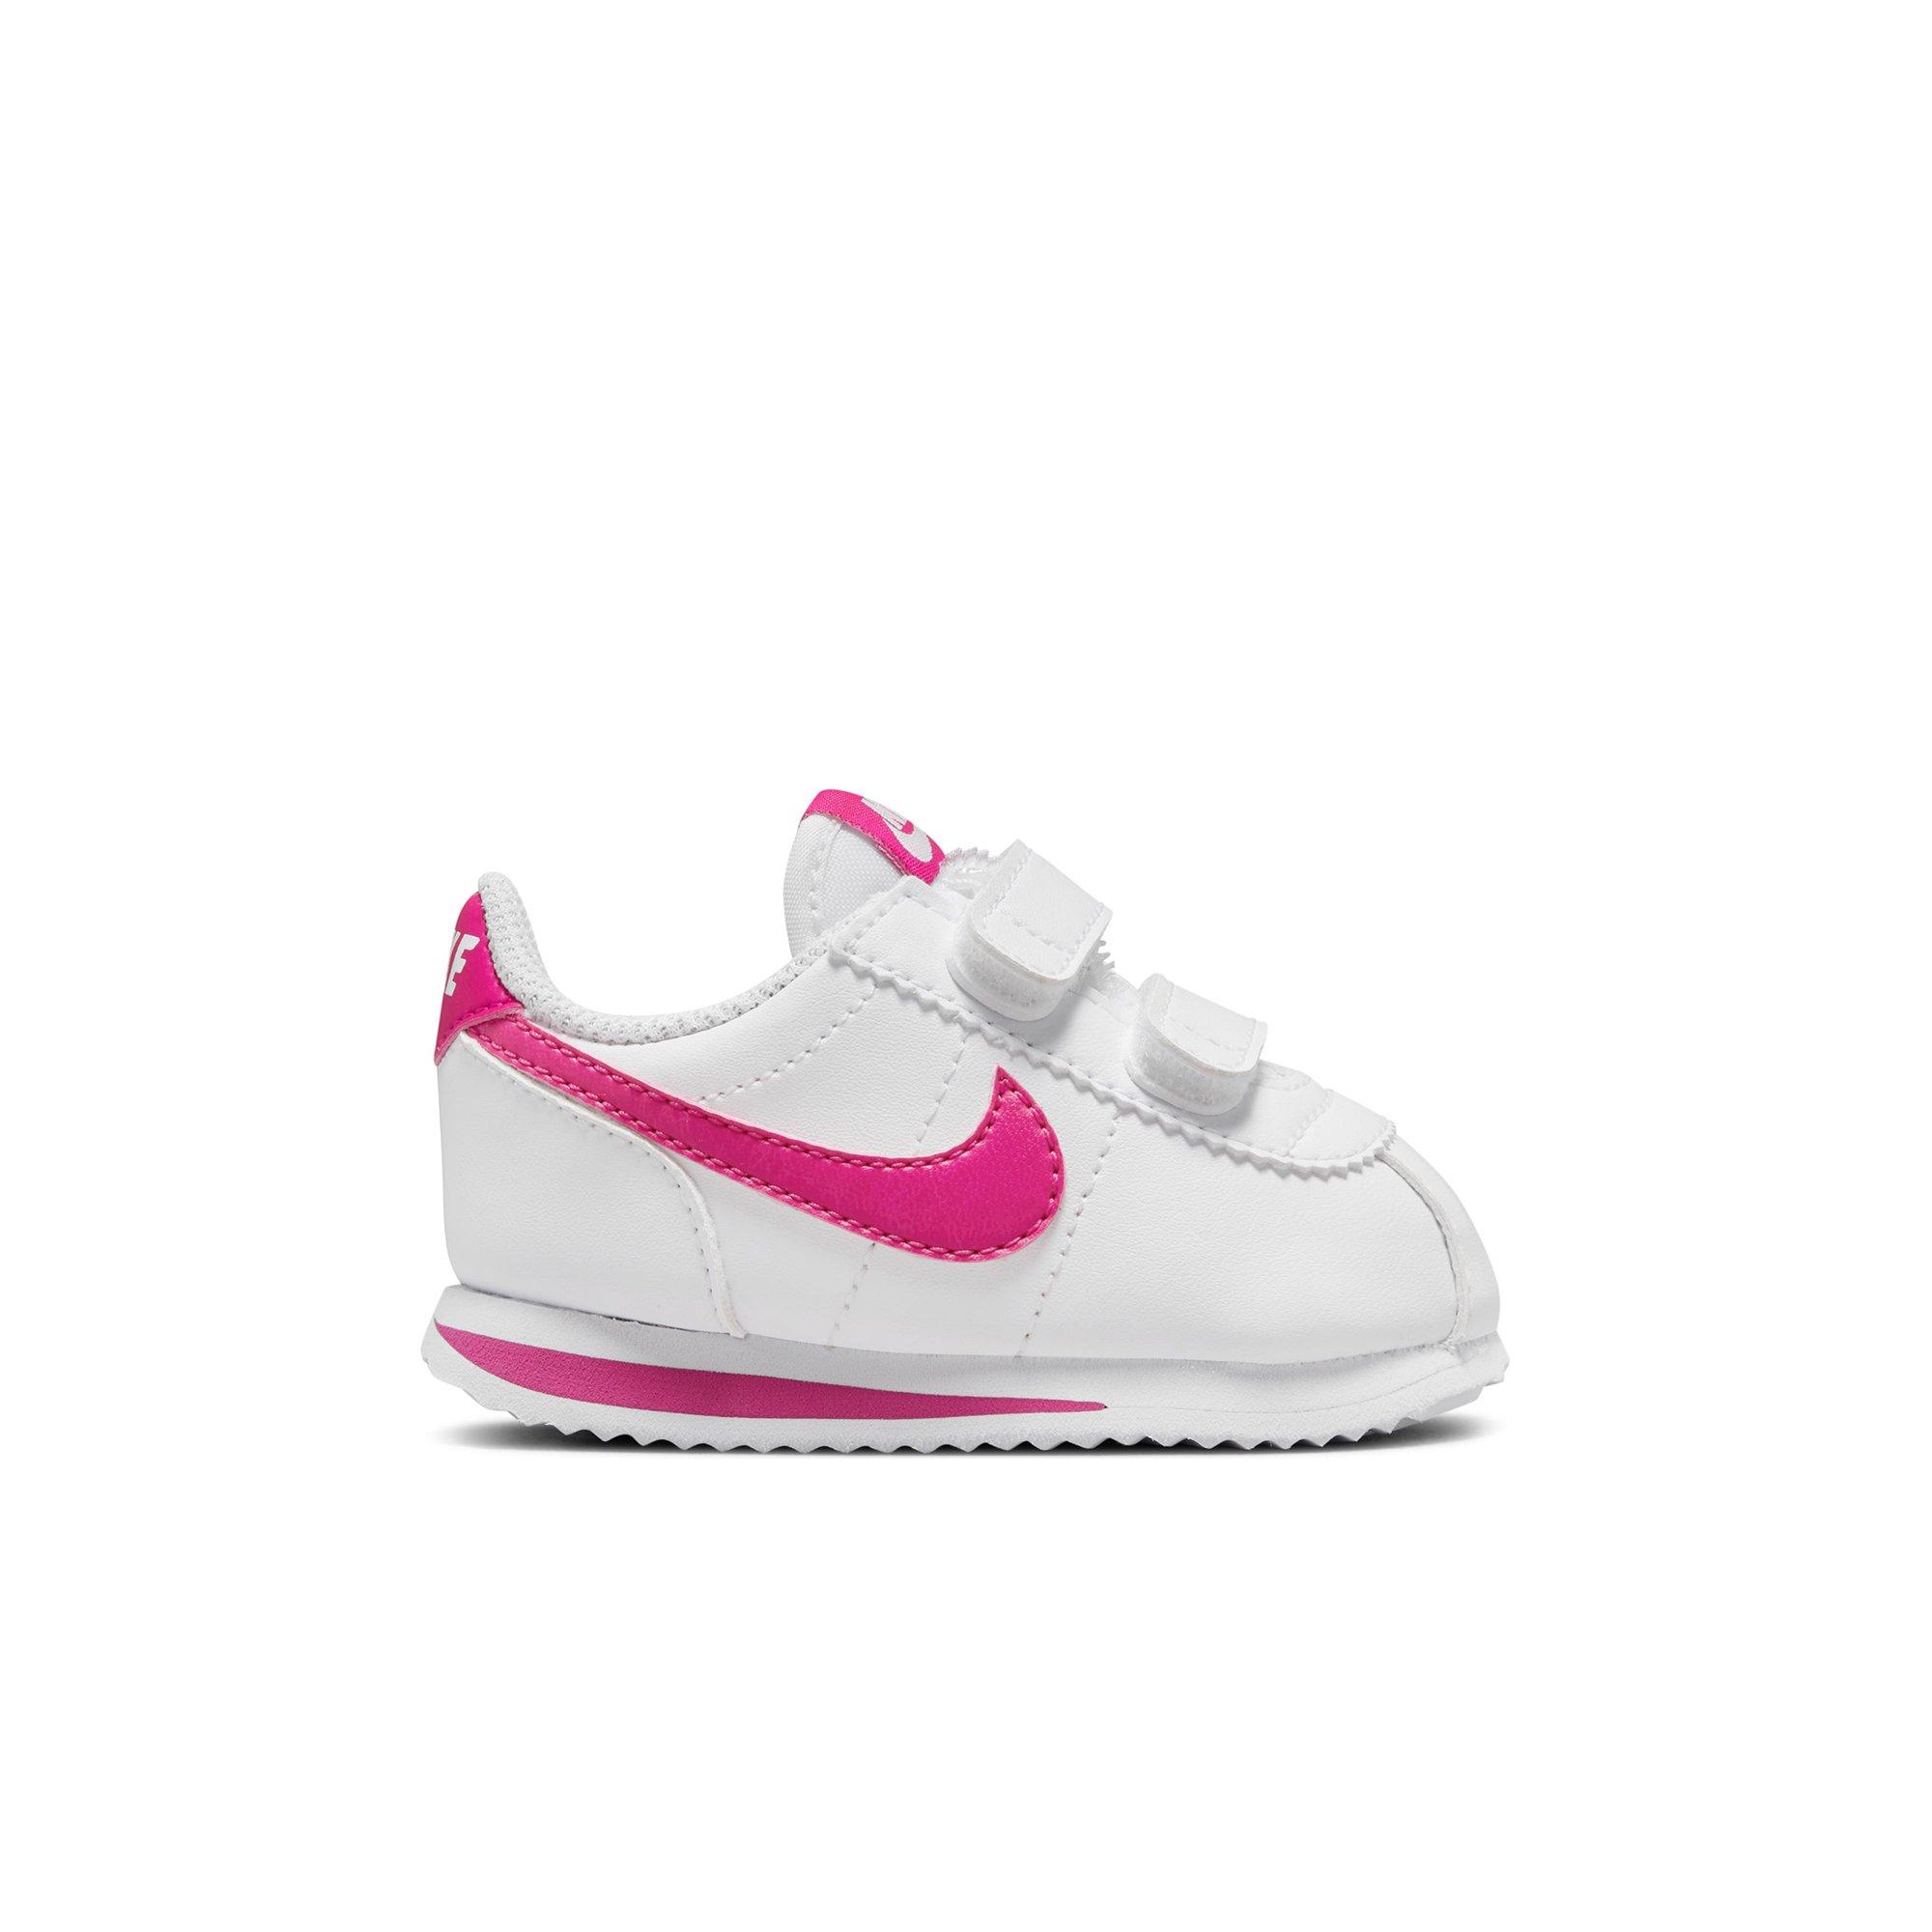 See The Pink Nike Cortez Sneakers Here